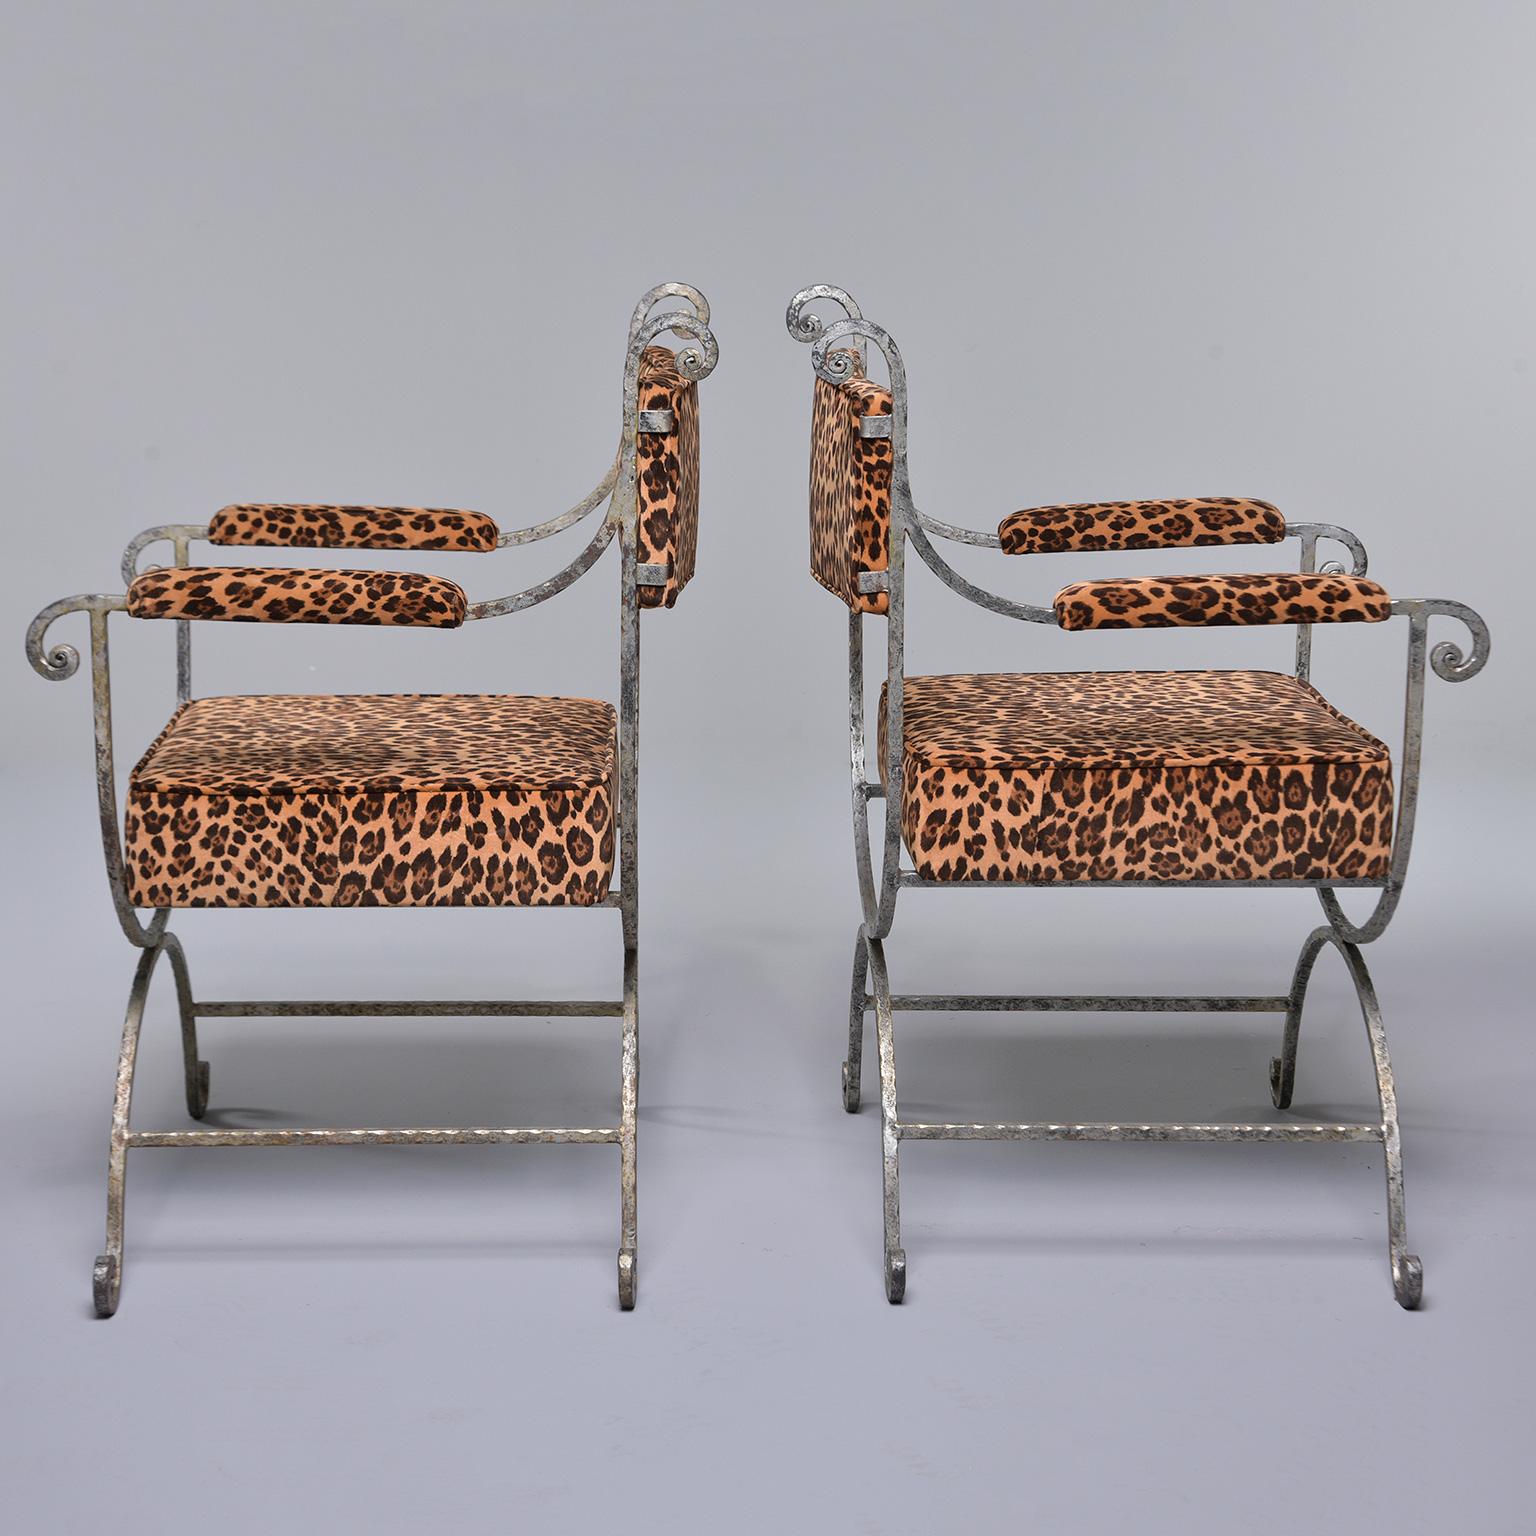 Pair of Iron Savonarola chairs with leopard print upholstery

Found in Italy, this pair of circa 1950s Savonarola style armchairs have an iron base with curved feet, padded arms and new leopard print moleskin upholstery.
Measures: Arm height